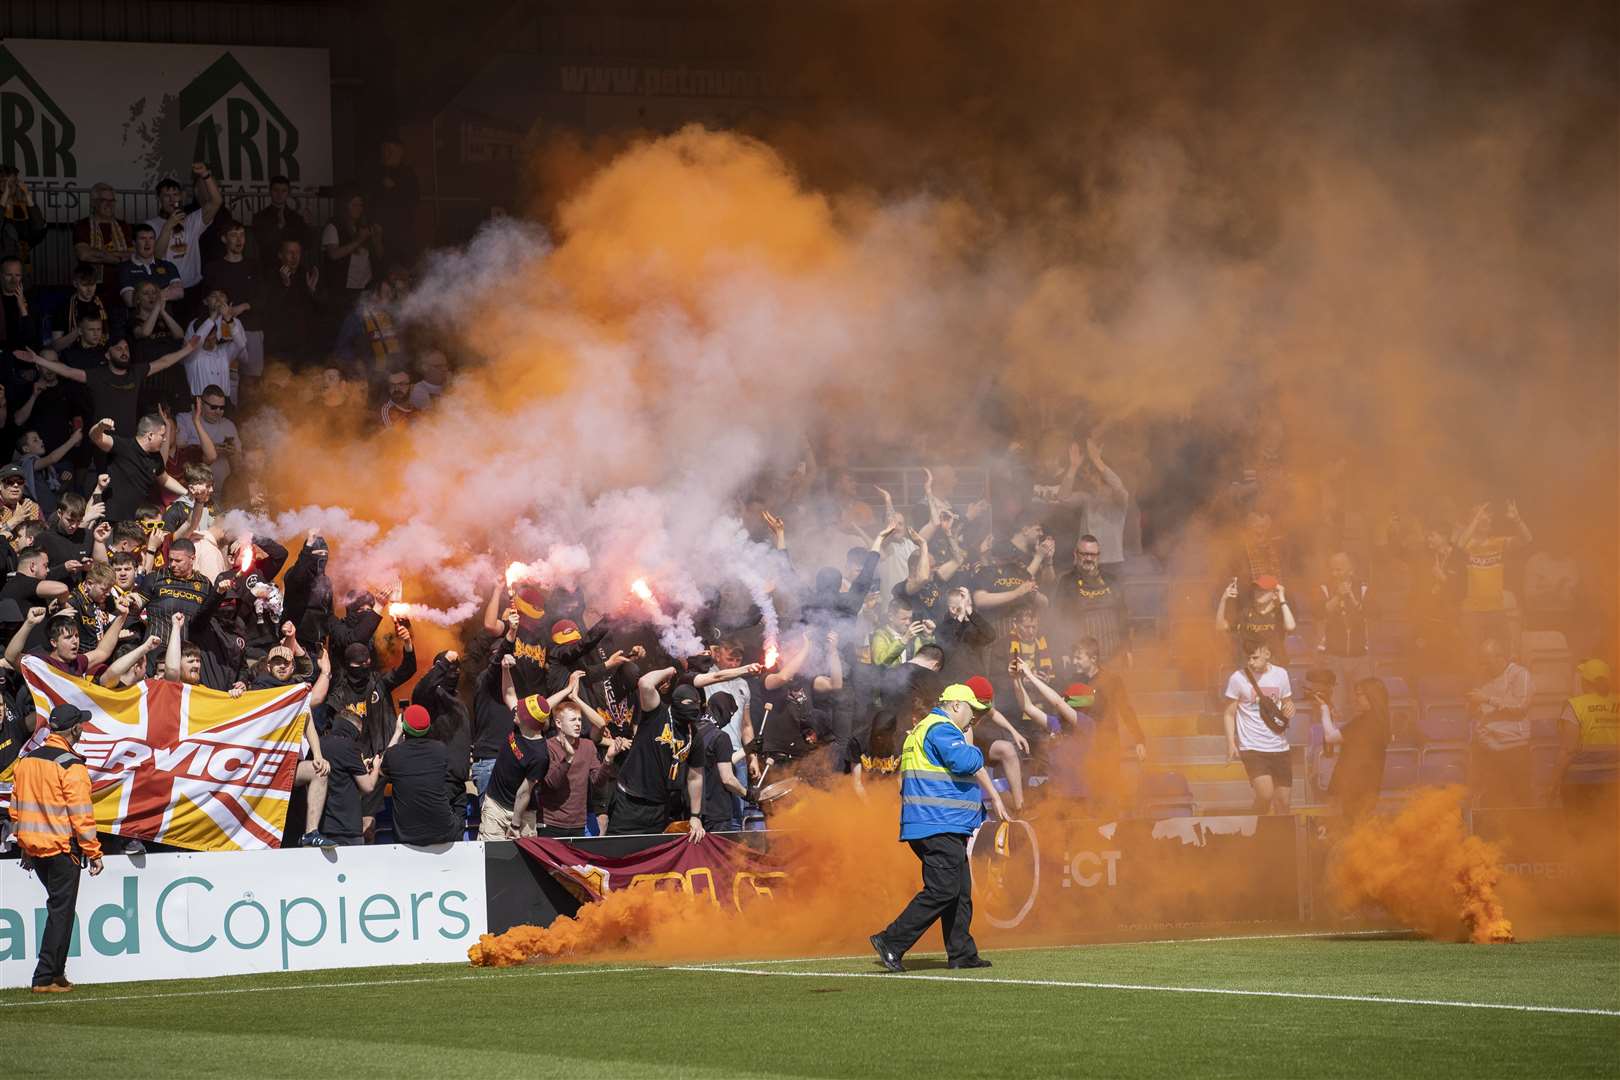 Motherwell fans lit flares at a game against Ross County last season.